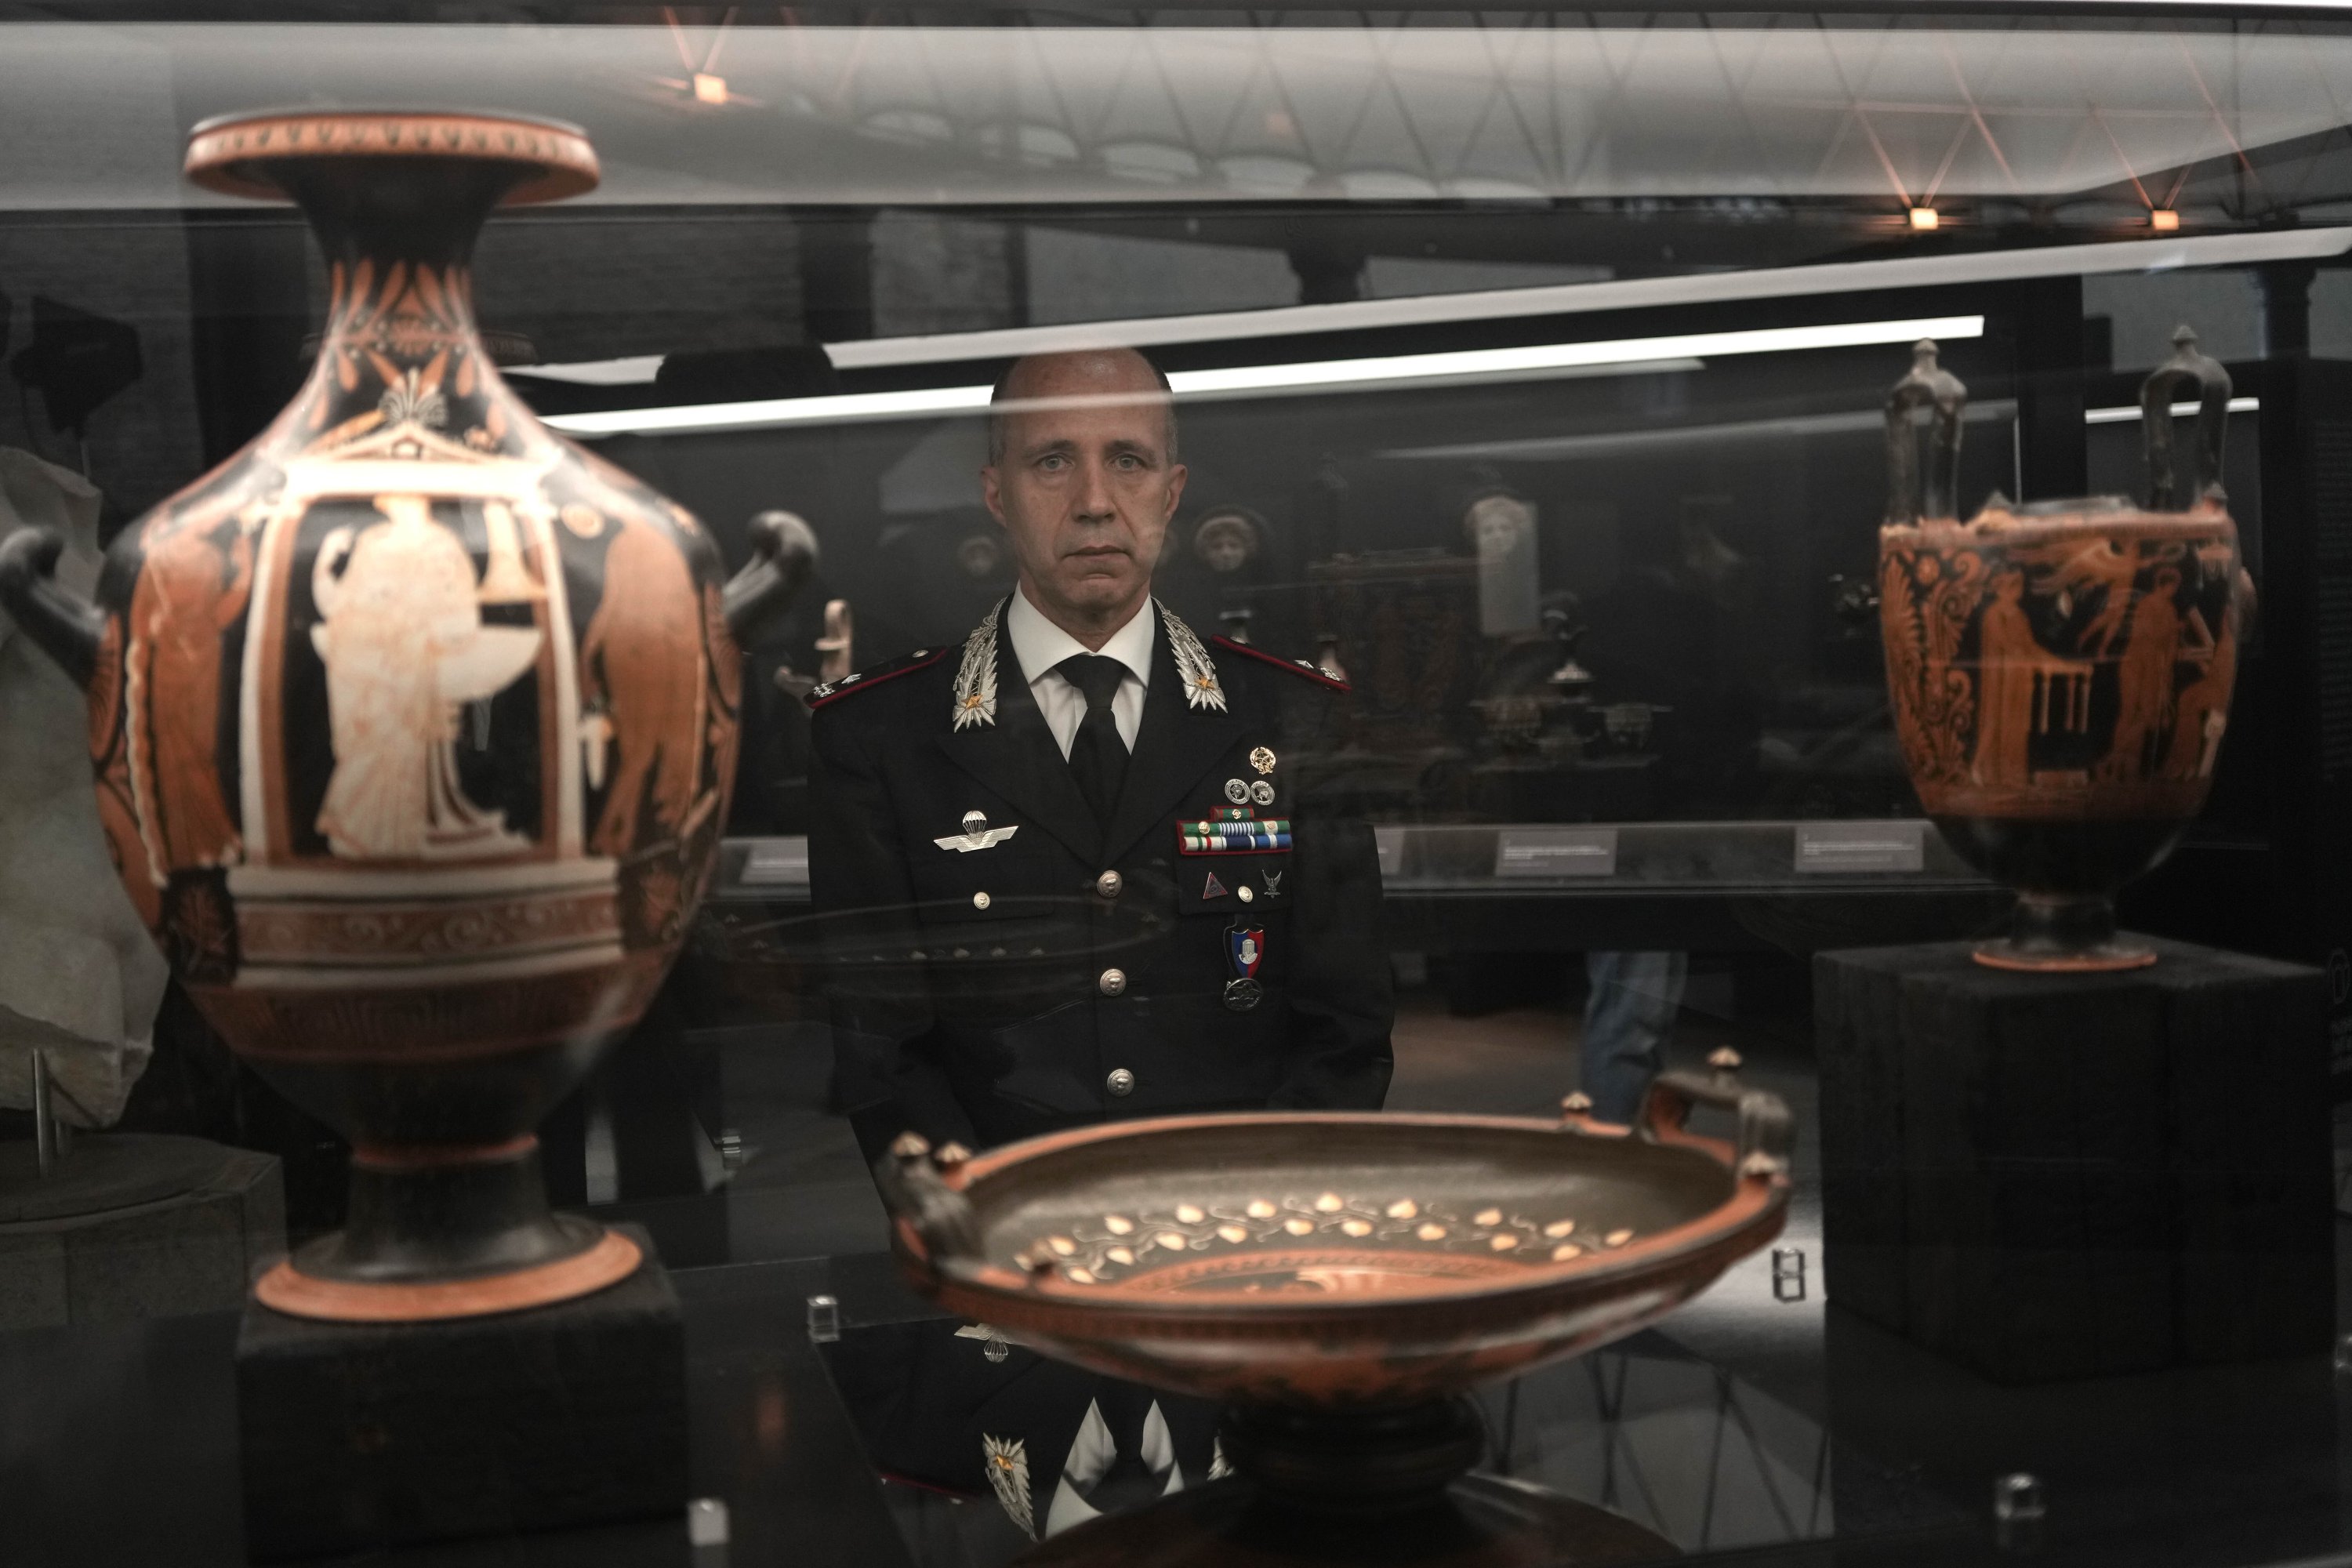 General Roberto Riccardi, head of the Carabinieri unit for the protection of cultural heritage looks at archaeological artifacts displayed in the new "Museum of Rescued Art" in Rome, Italy, Wednesday, June 15, 2022. (AP)